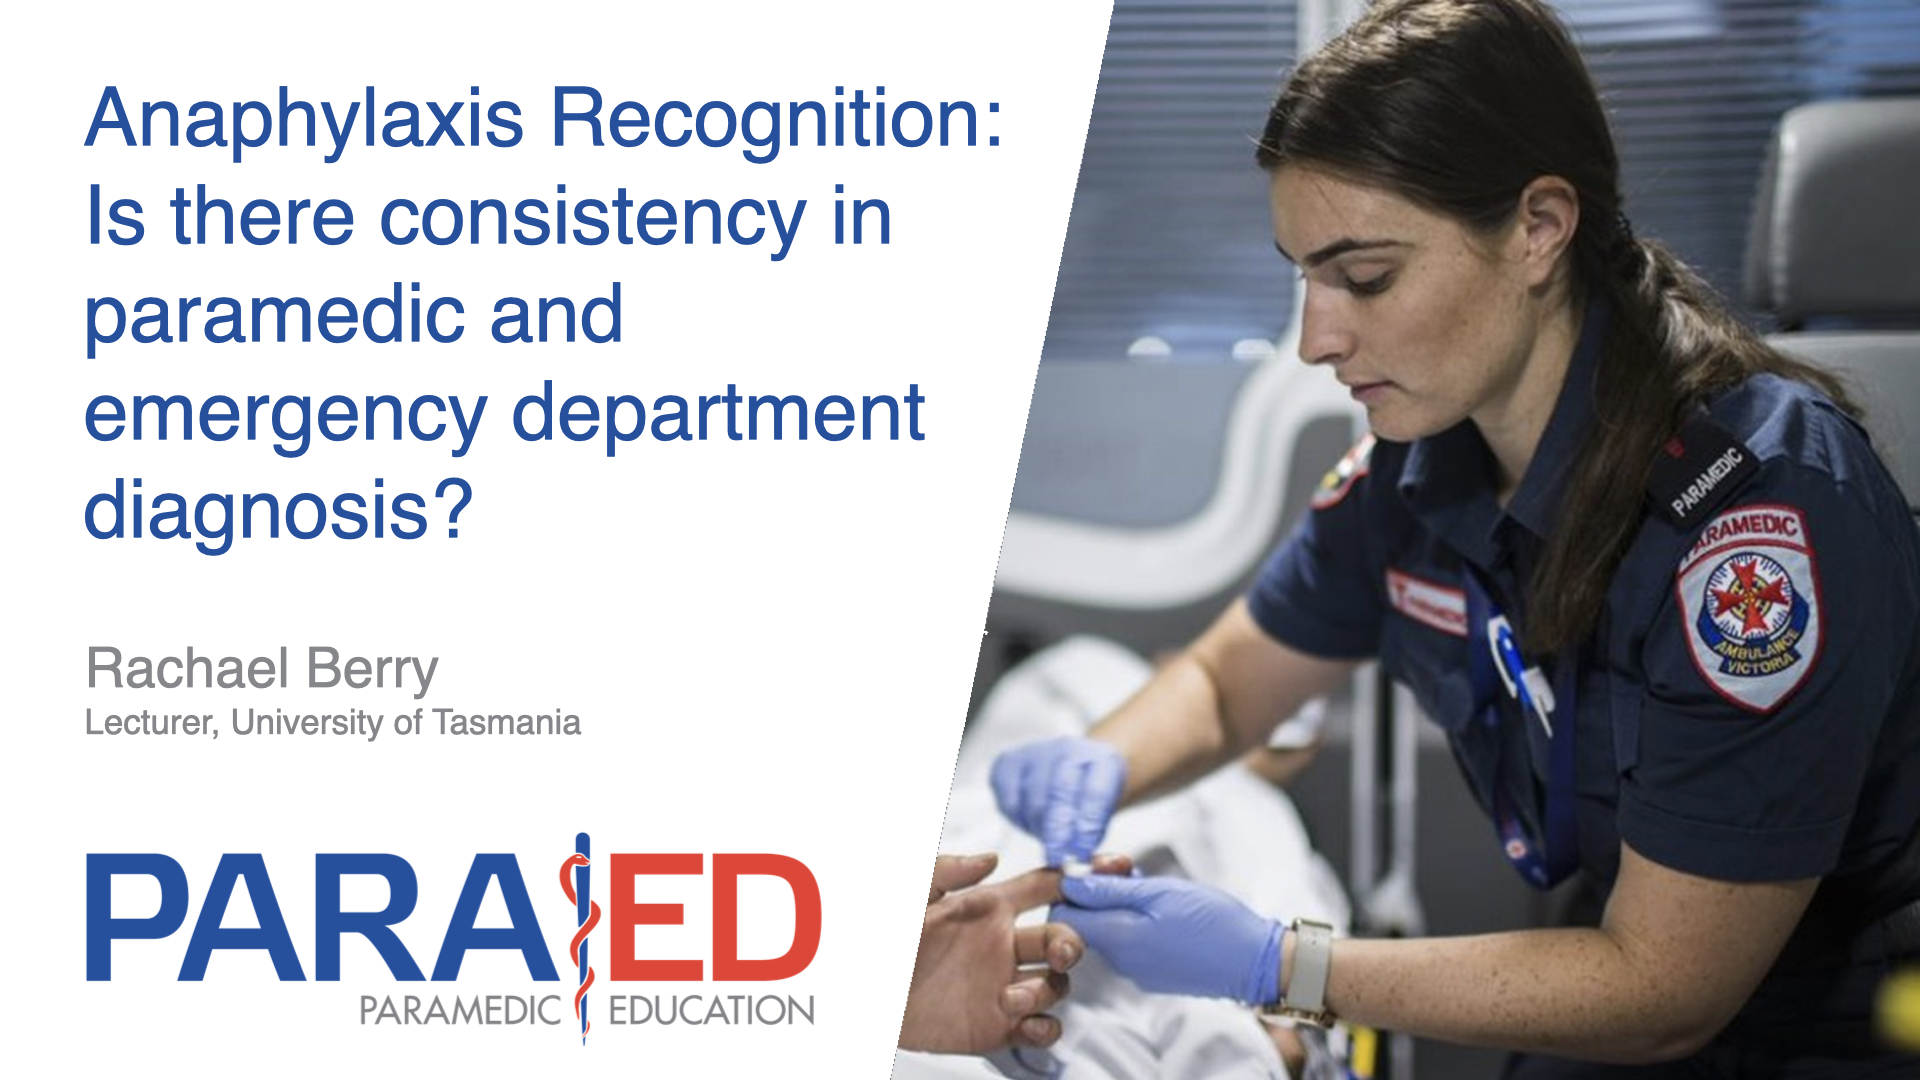 Anaphylaxis Recognition: Is there consistency in paramedic and emergency department diagnosis?